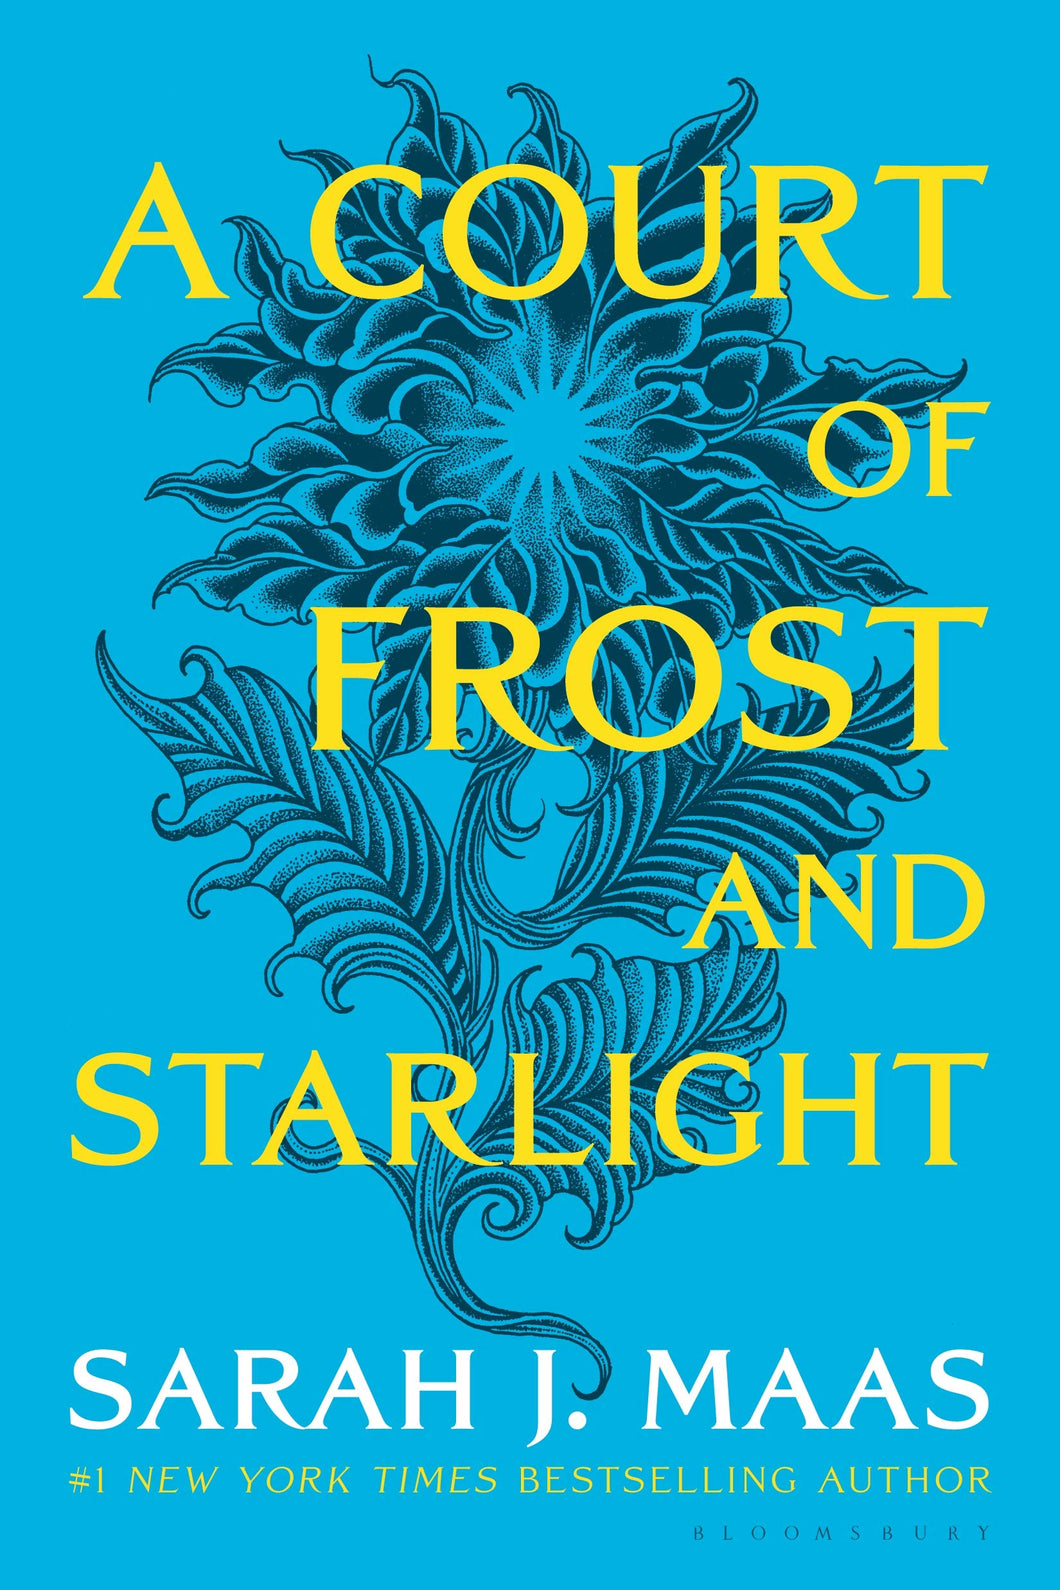 A Court of Thorns and Roses Book 3.5: A Court of Frost and Starlight by Sarah J. Maas